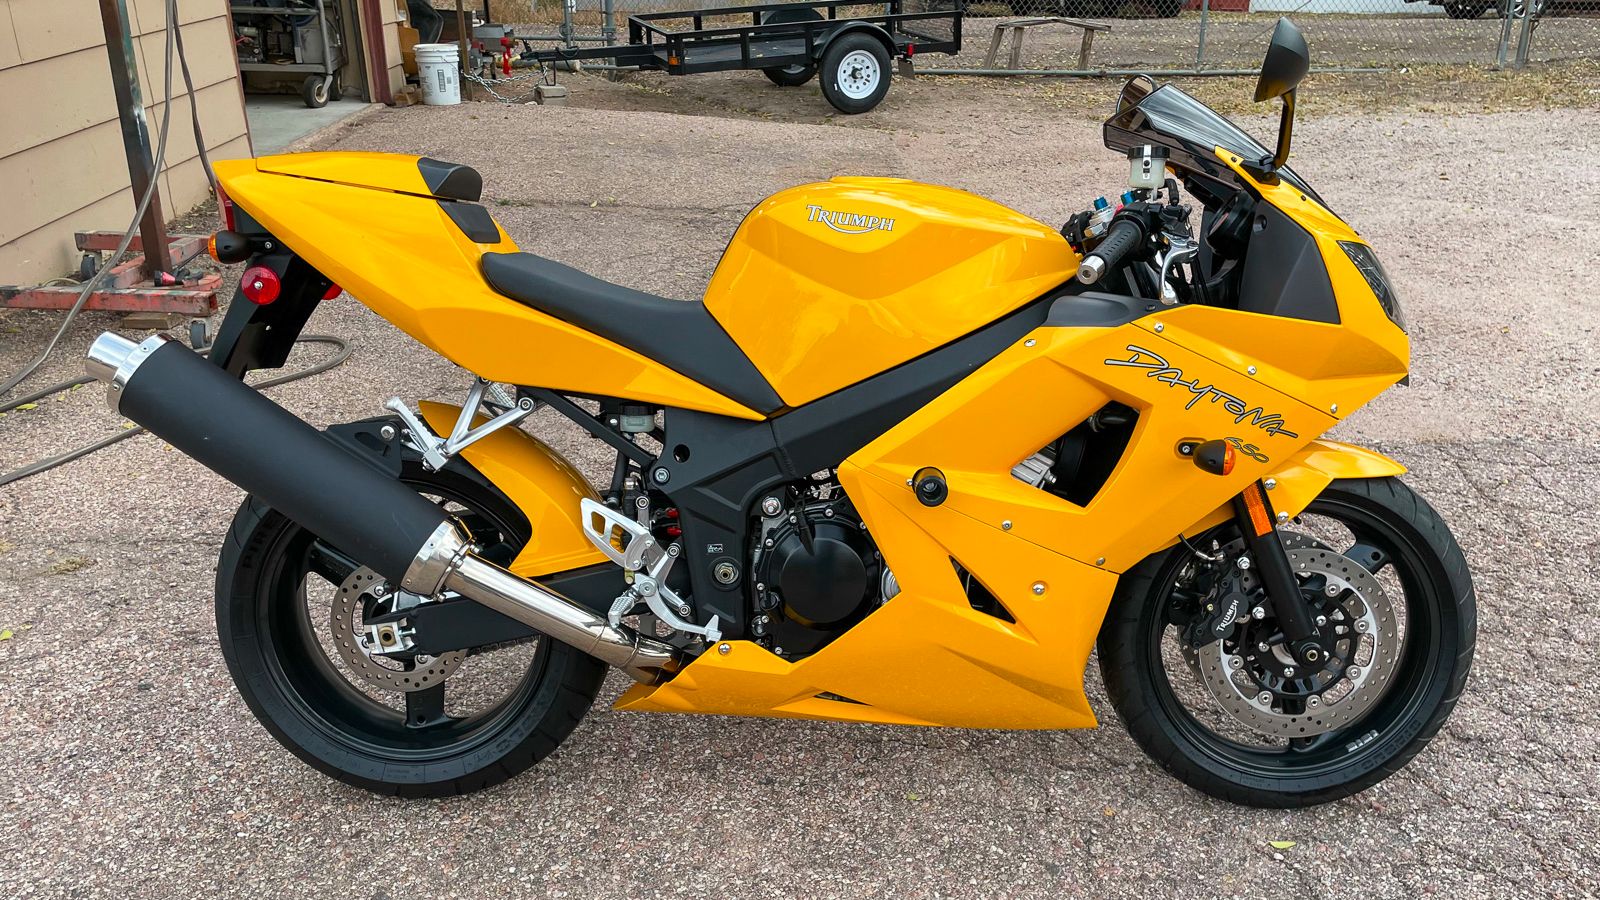 This Triumph Daytona 650 Put 600cc Japanese Screamers In Their Place